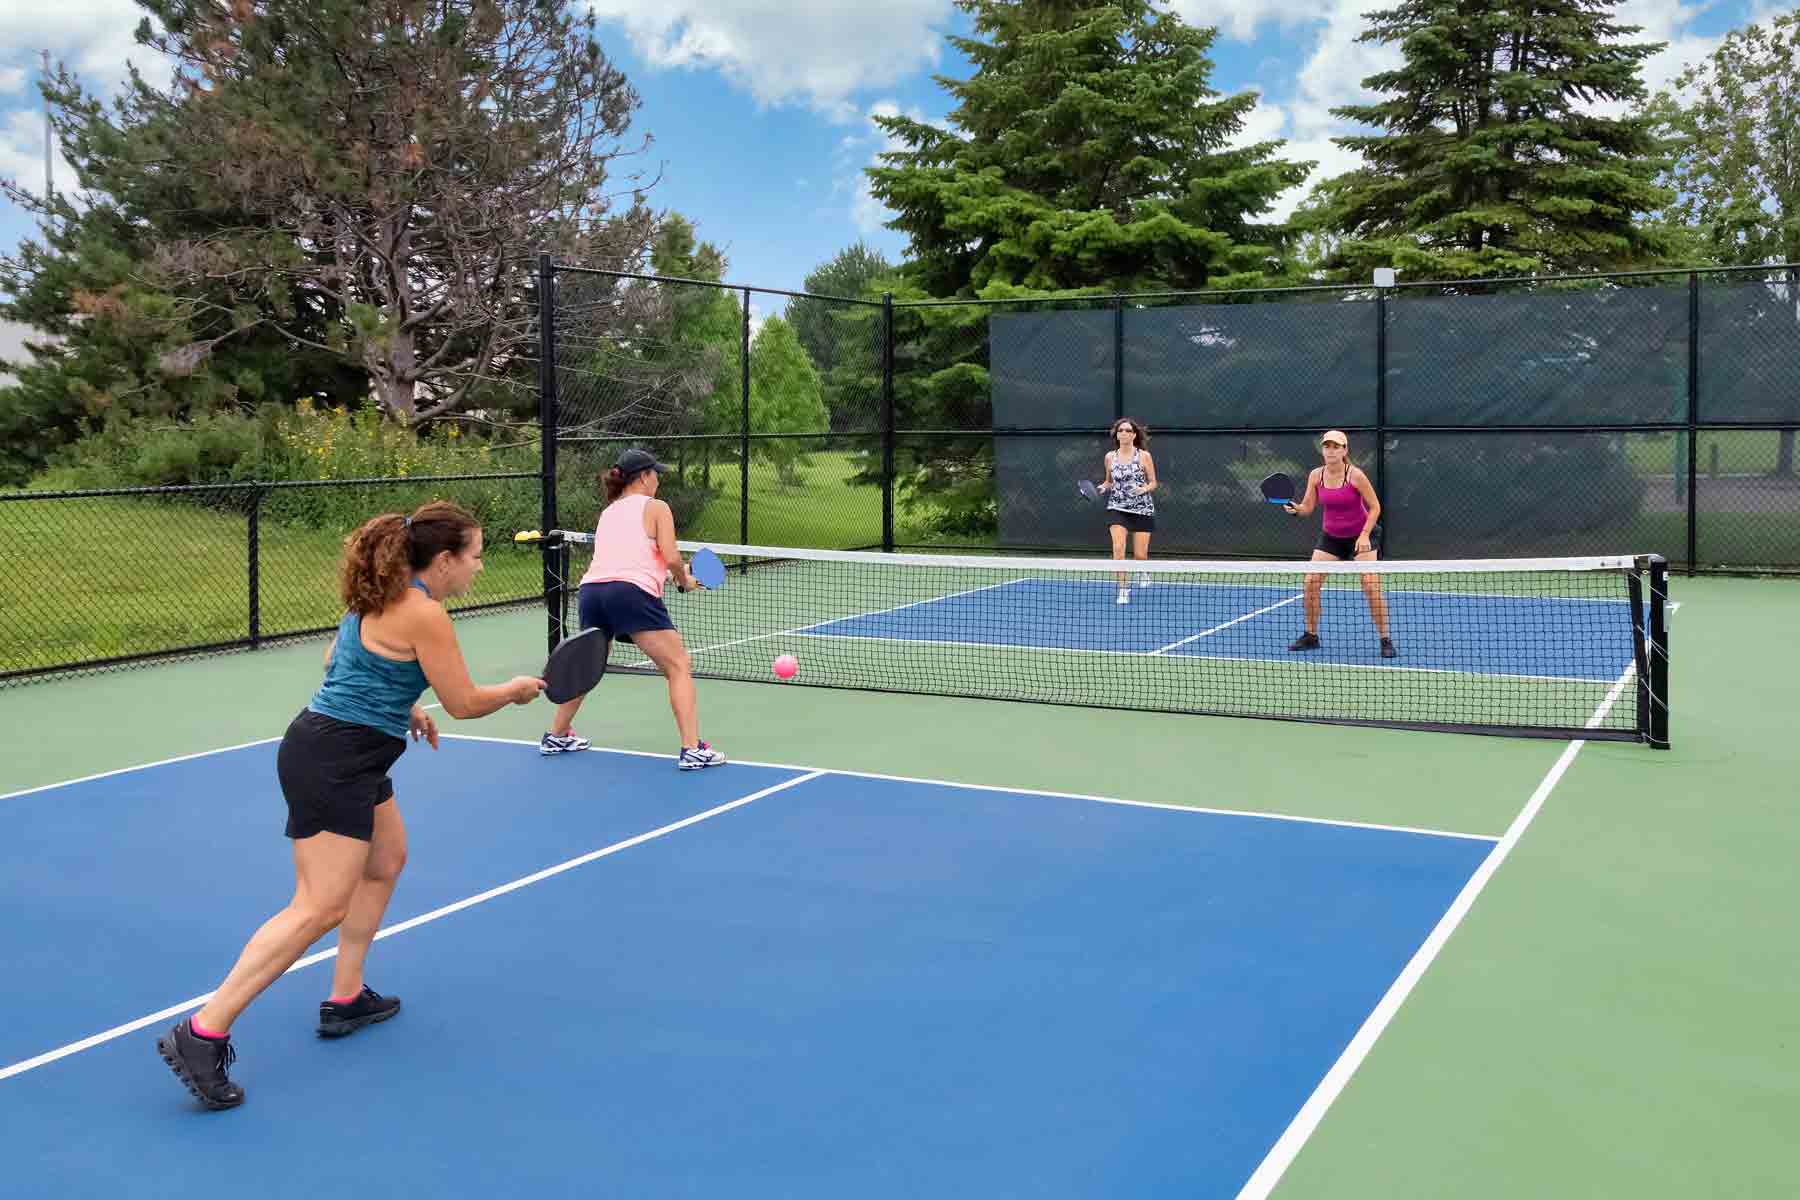 The Cost of Building a Pickleball Court omkelly